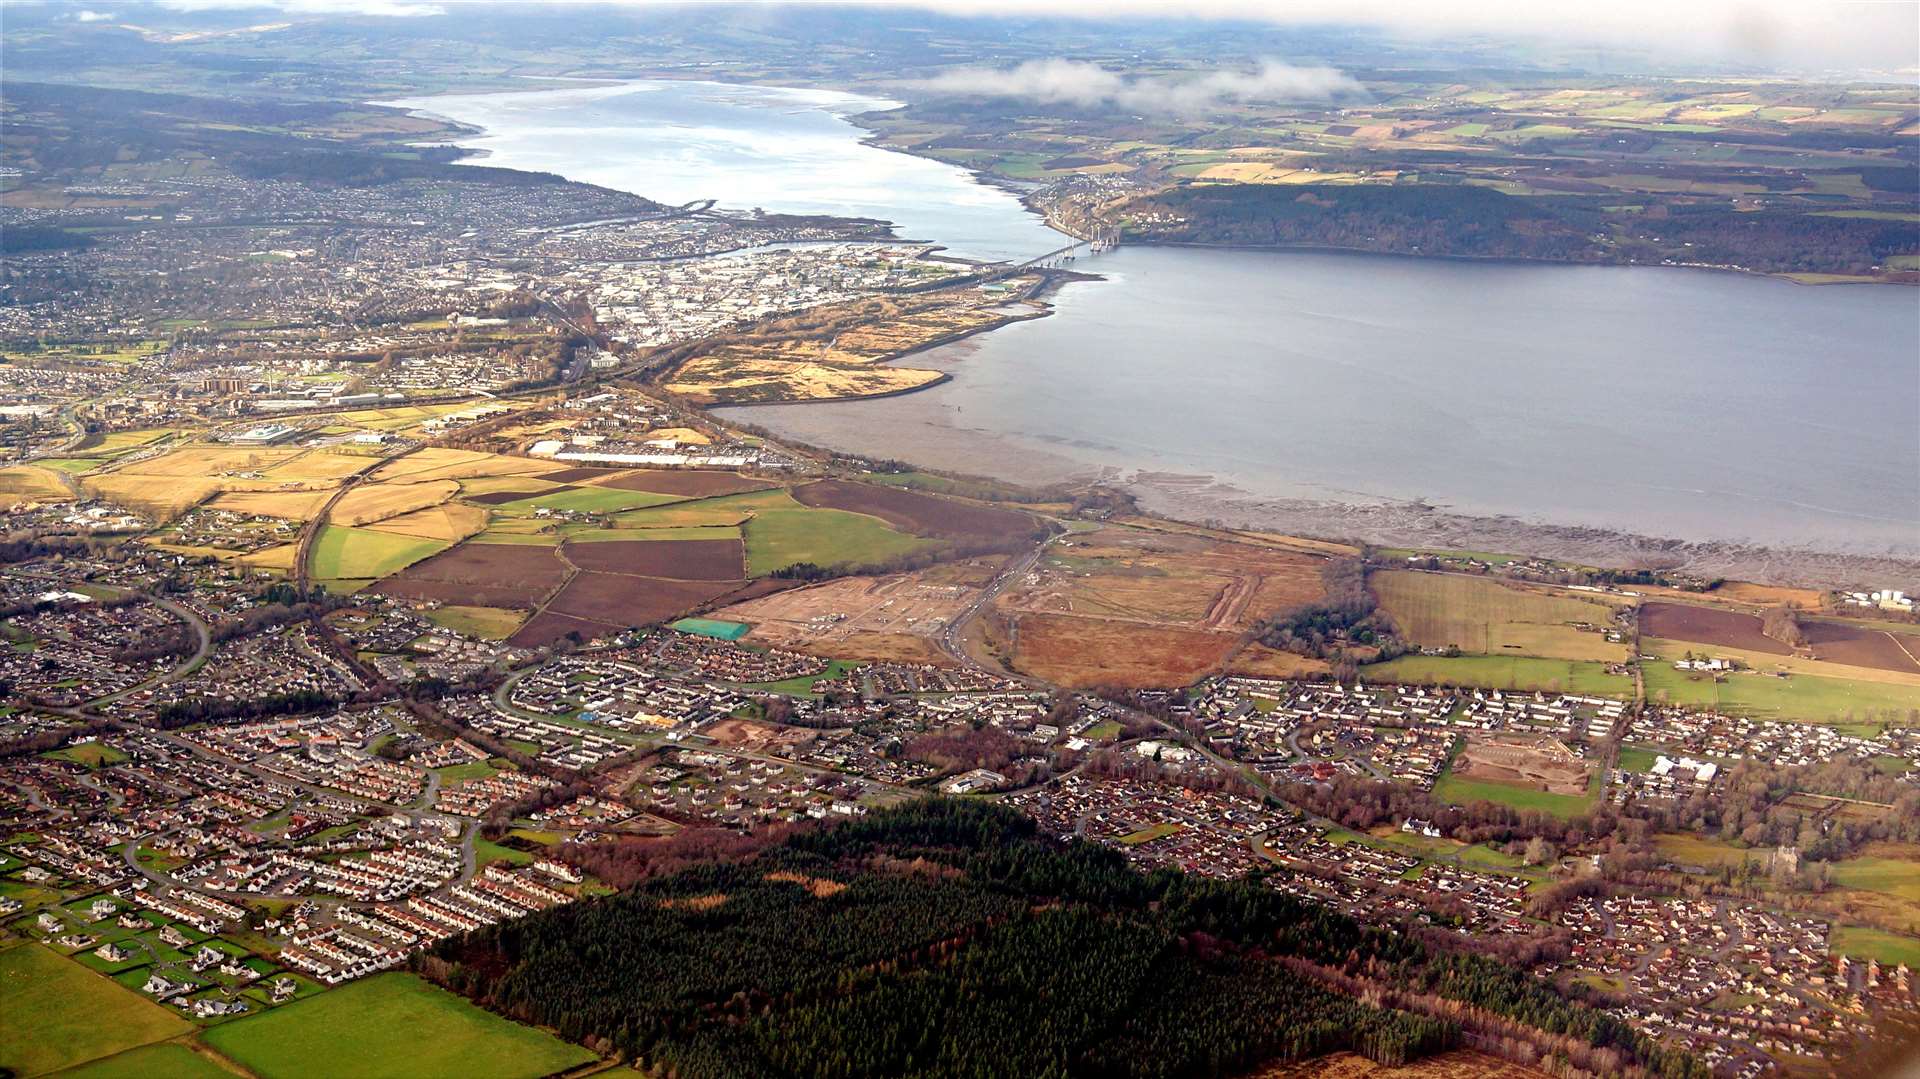 A new plan aims to support areas including the Highlands where population is declining.